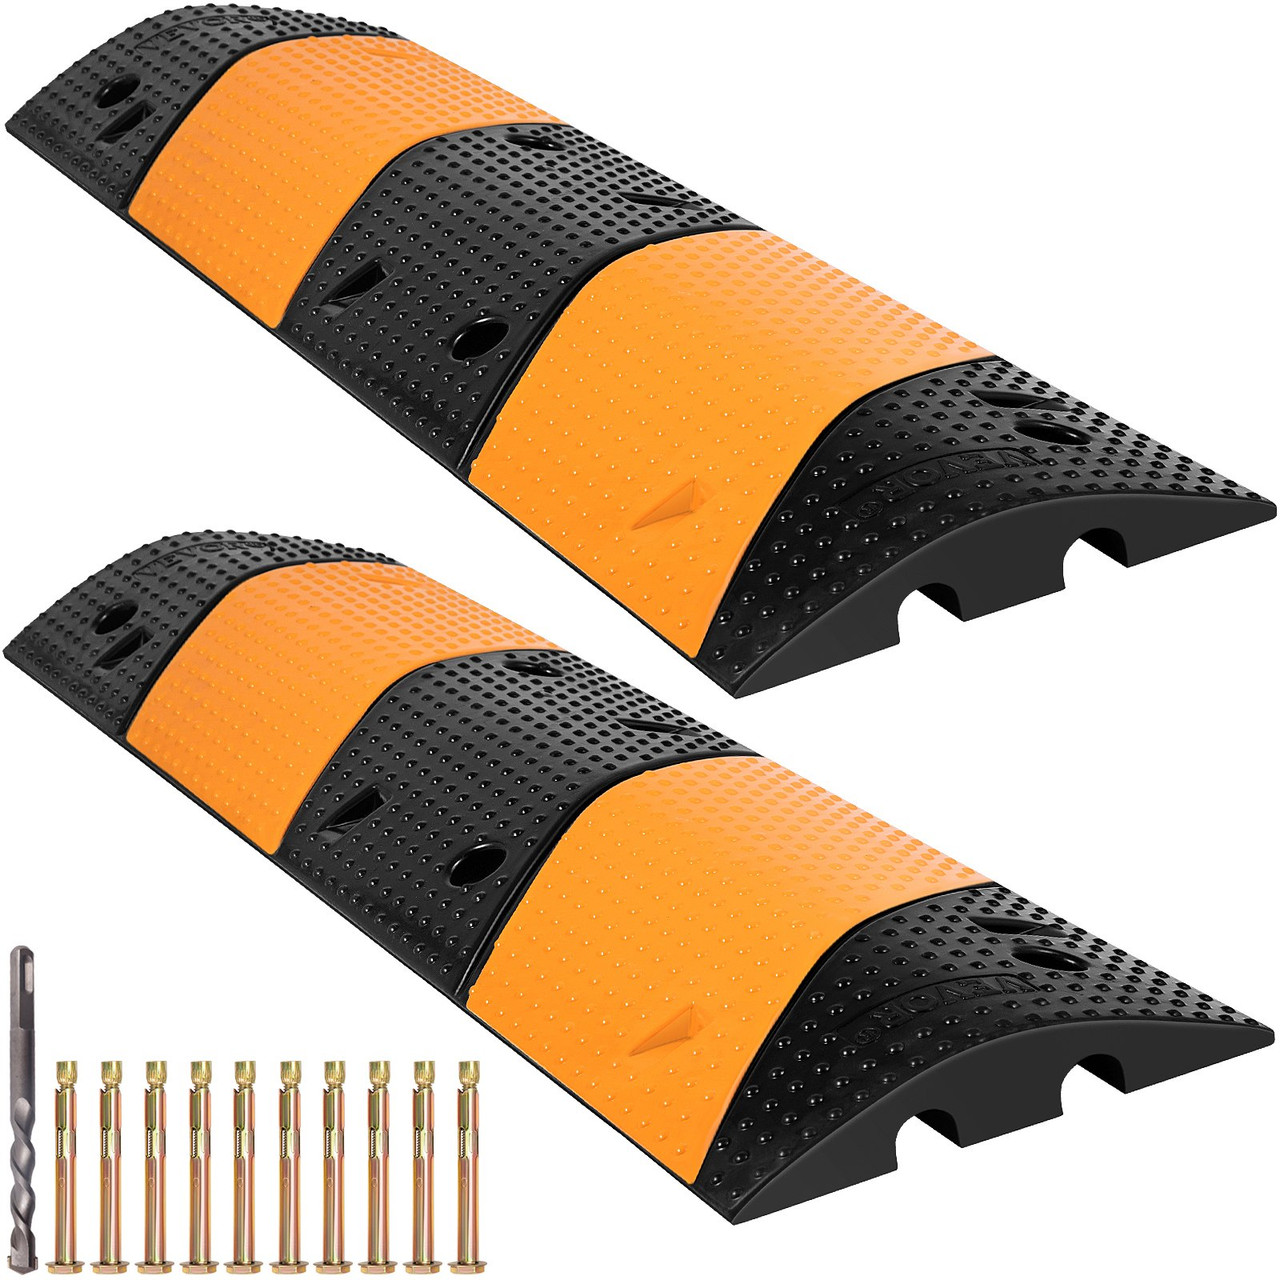 Rubber Speed Bump, 2 Pack 2 Channel Speed Bump Hump, 42" Long Modular Speed Bump Rated 22000 LBS Load Capacity, 40.2 x 11.8 x 2.4 inch Garage Speed Bump for Asphalt Concrete Gravel Driveway